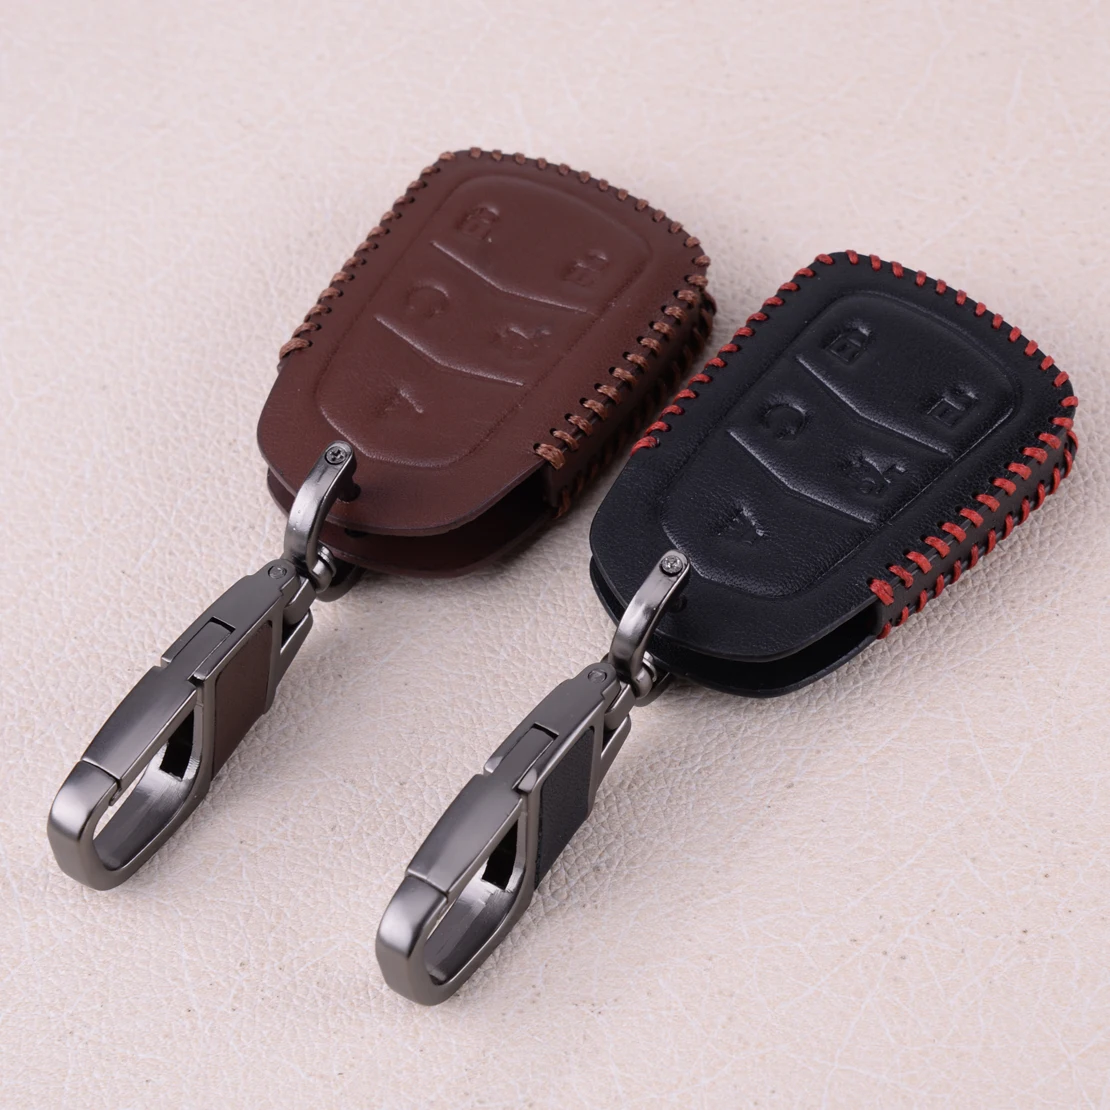 5 Buttons Remote Fob Bag Holder Leather Car Key Cover Case For Cadillac CTS ATS